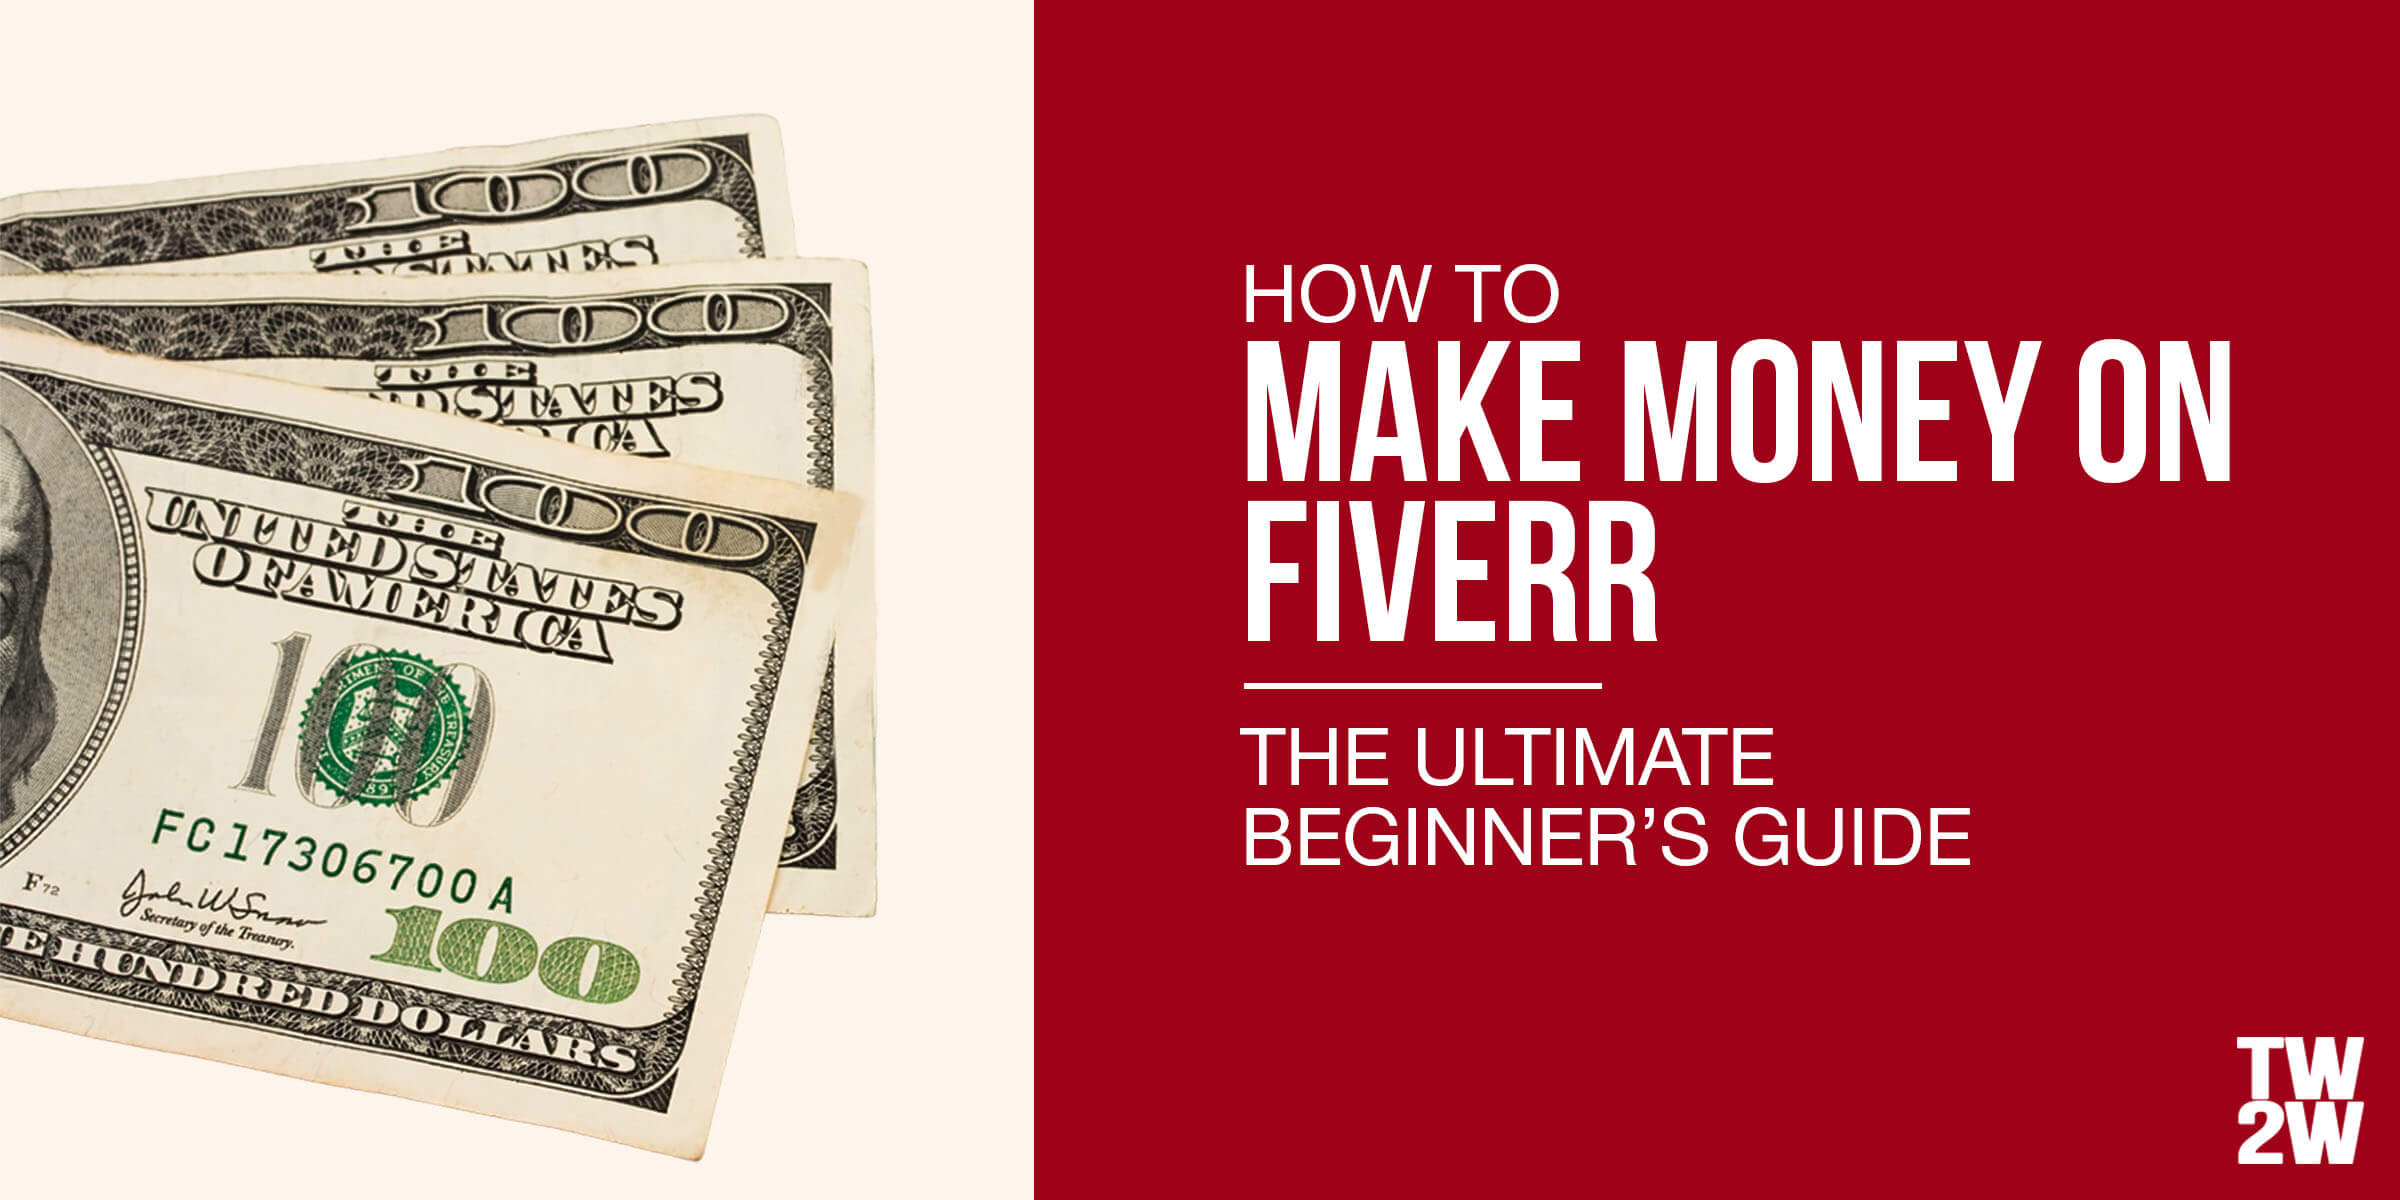 Is Fiverr worth it for beginners?